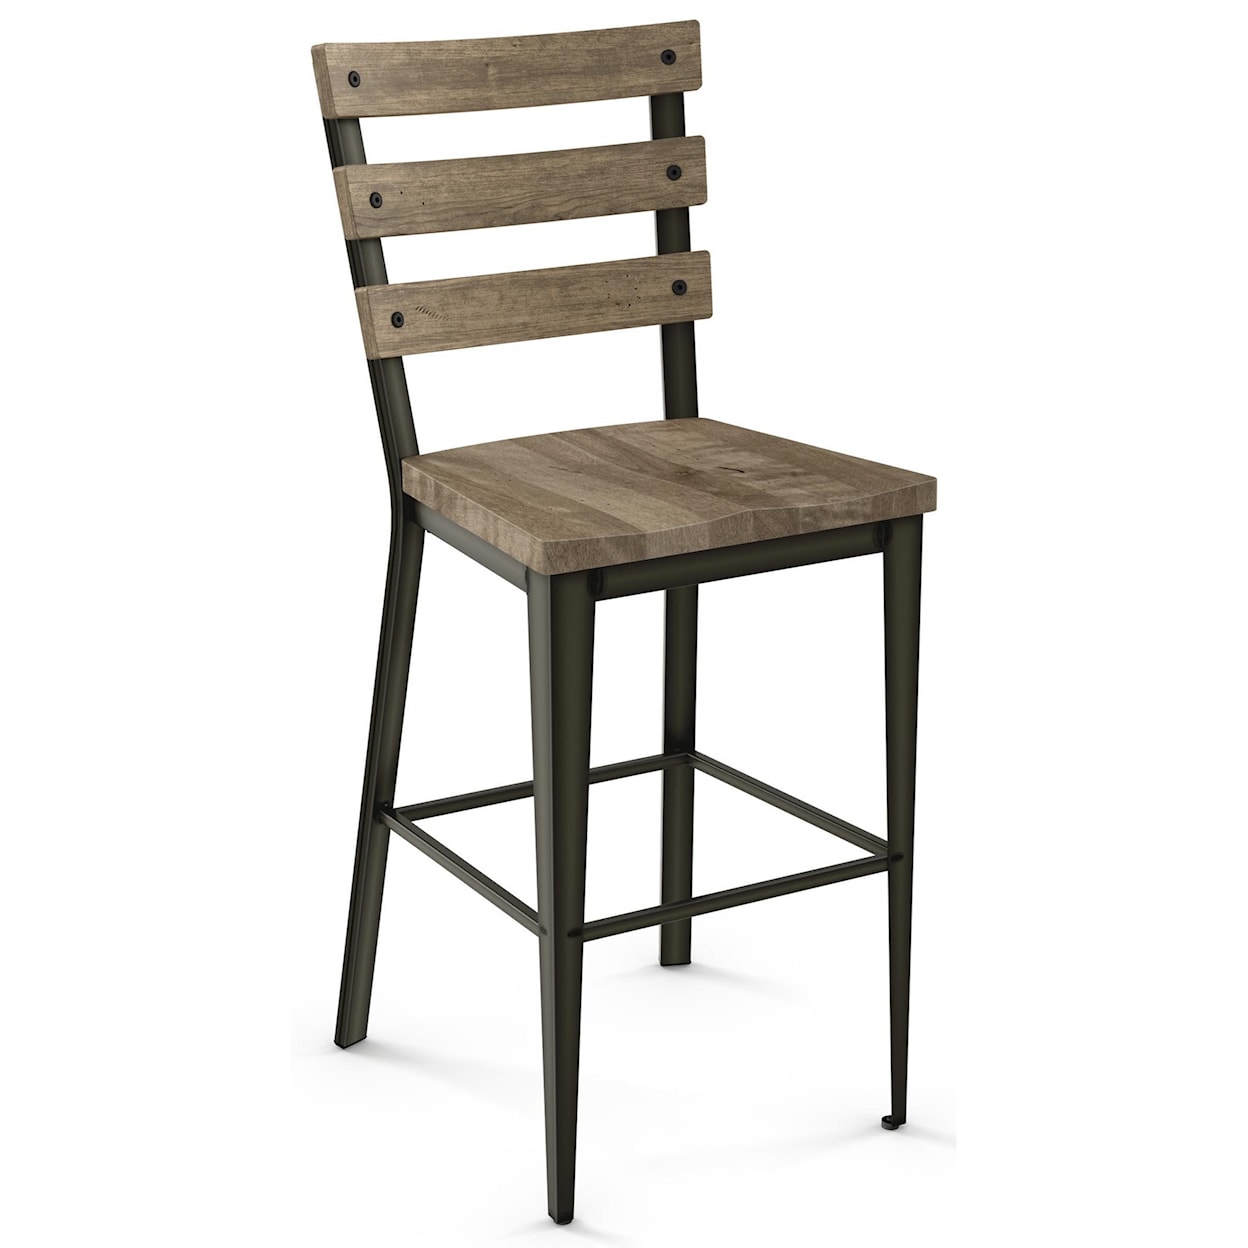 Amisco Industrial 30" Dexter Bar Stool with Wood Seat